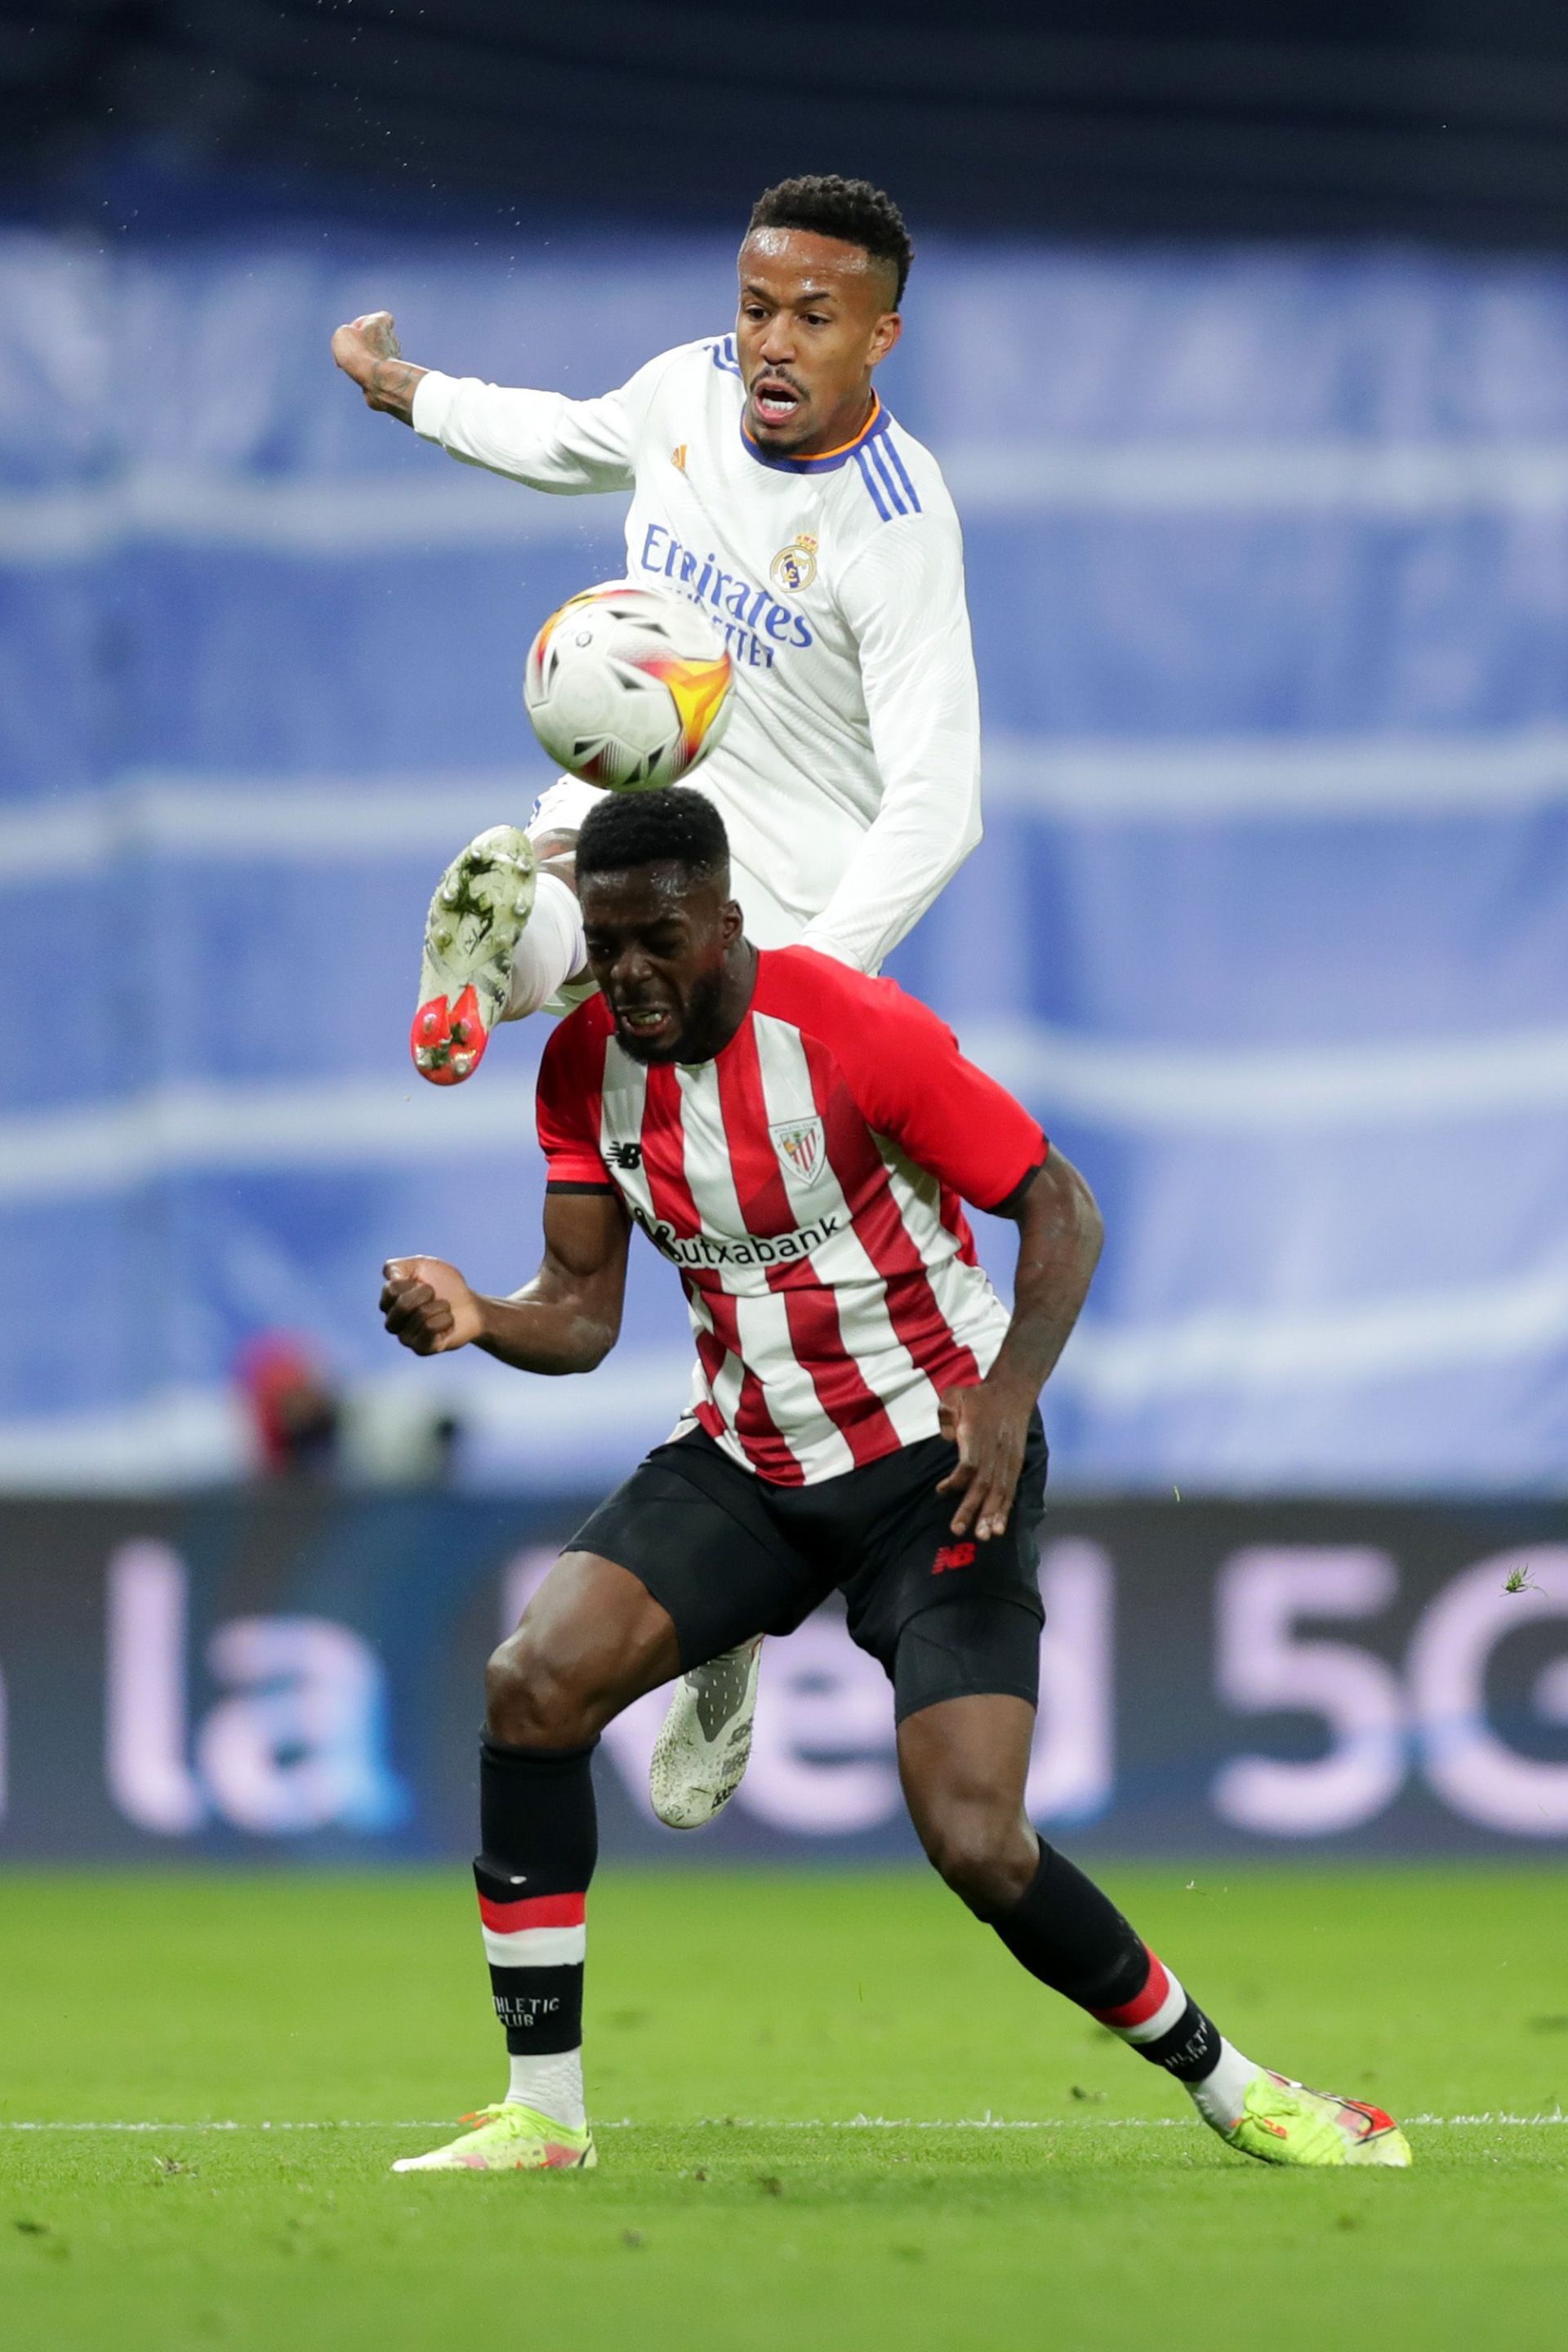 Inaki Williams tussles it out with Eder Militao.